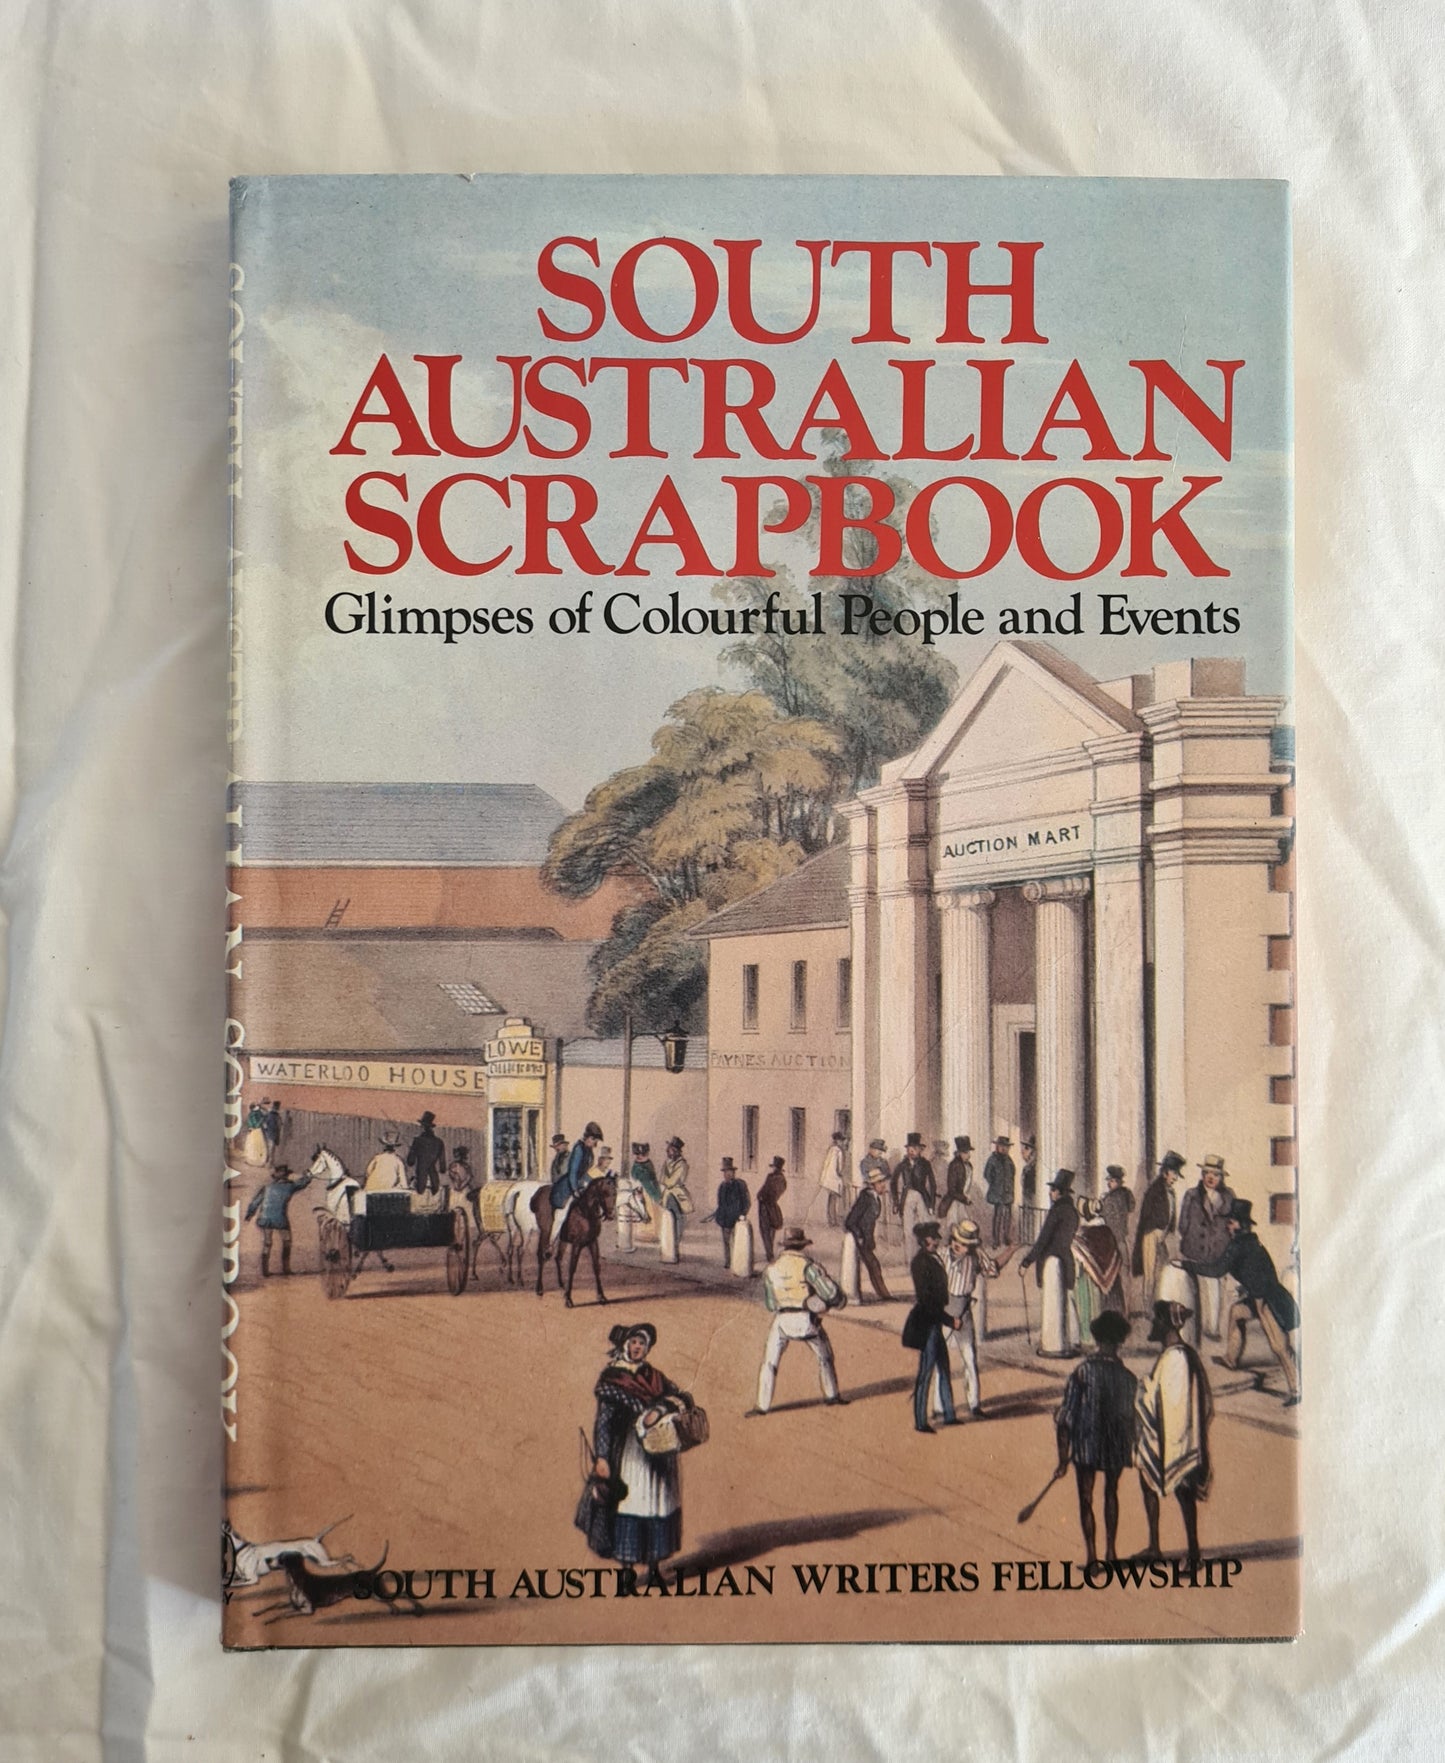 South Australian Scrapbook  Glimpses of Colourful People and Events  Compiled and edited by Madeleine Brunato